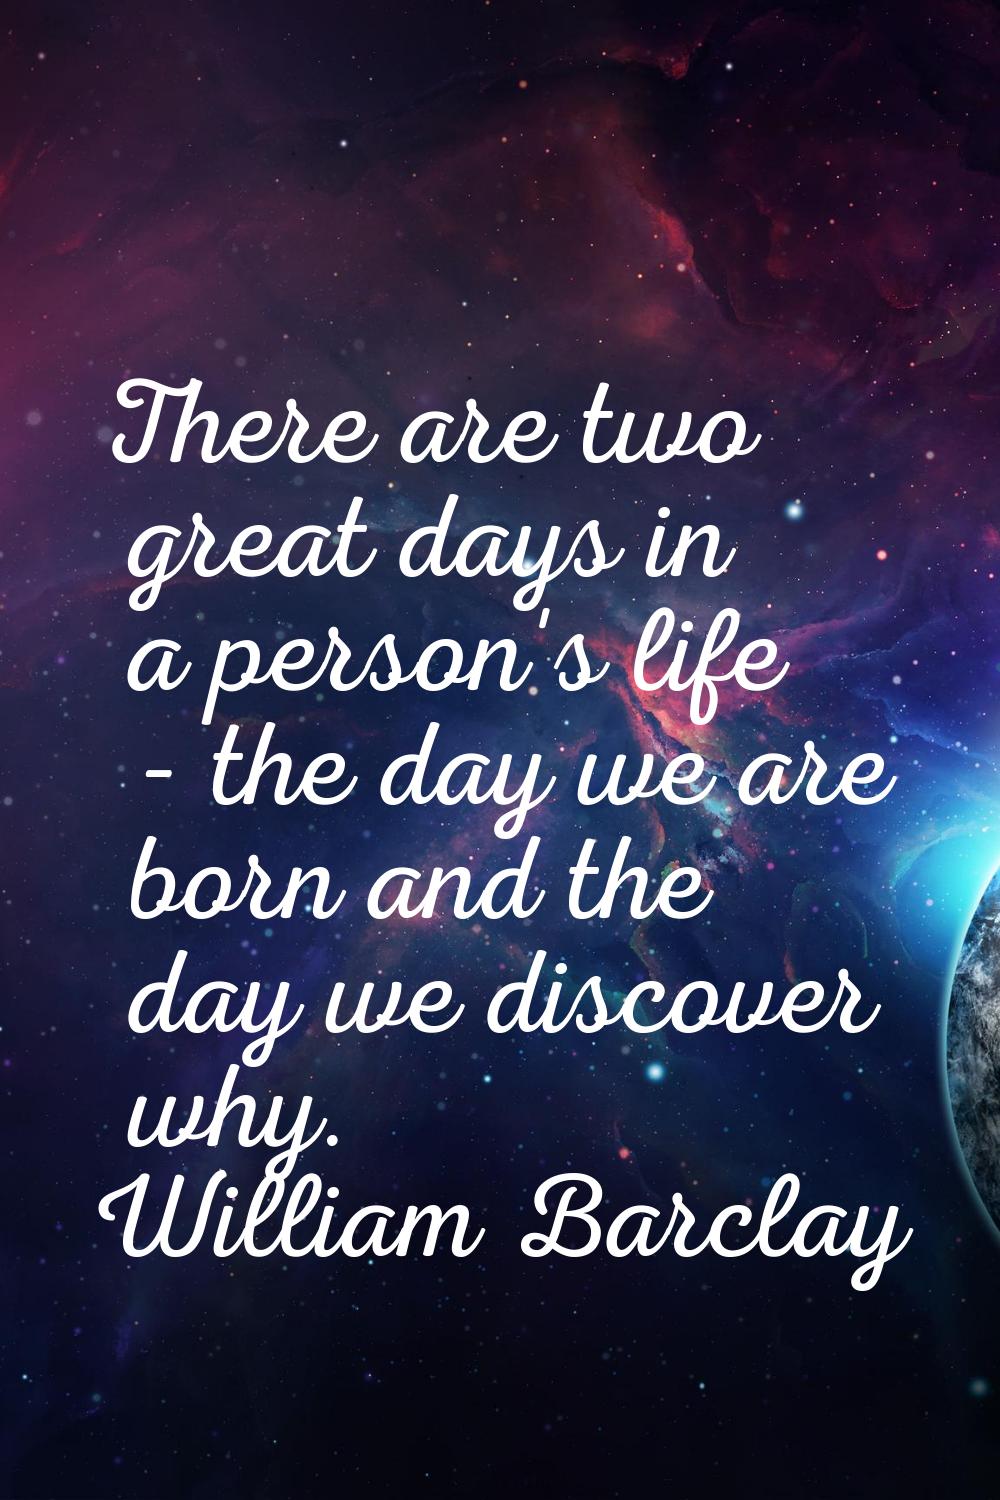 There are two great days in a person's life - the day we are born and the day we discover why.